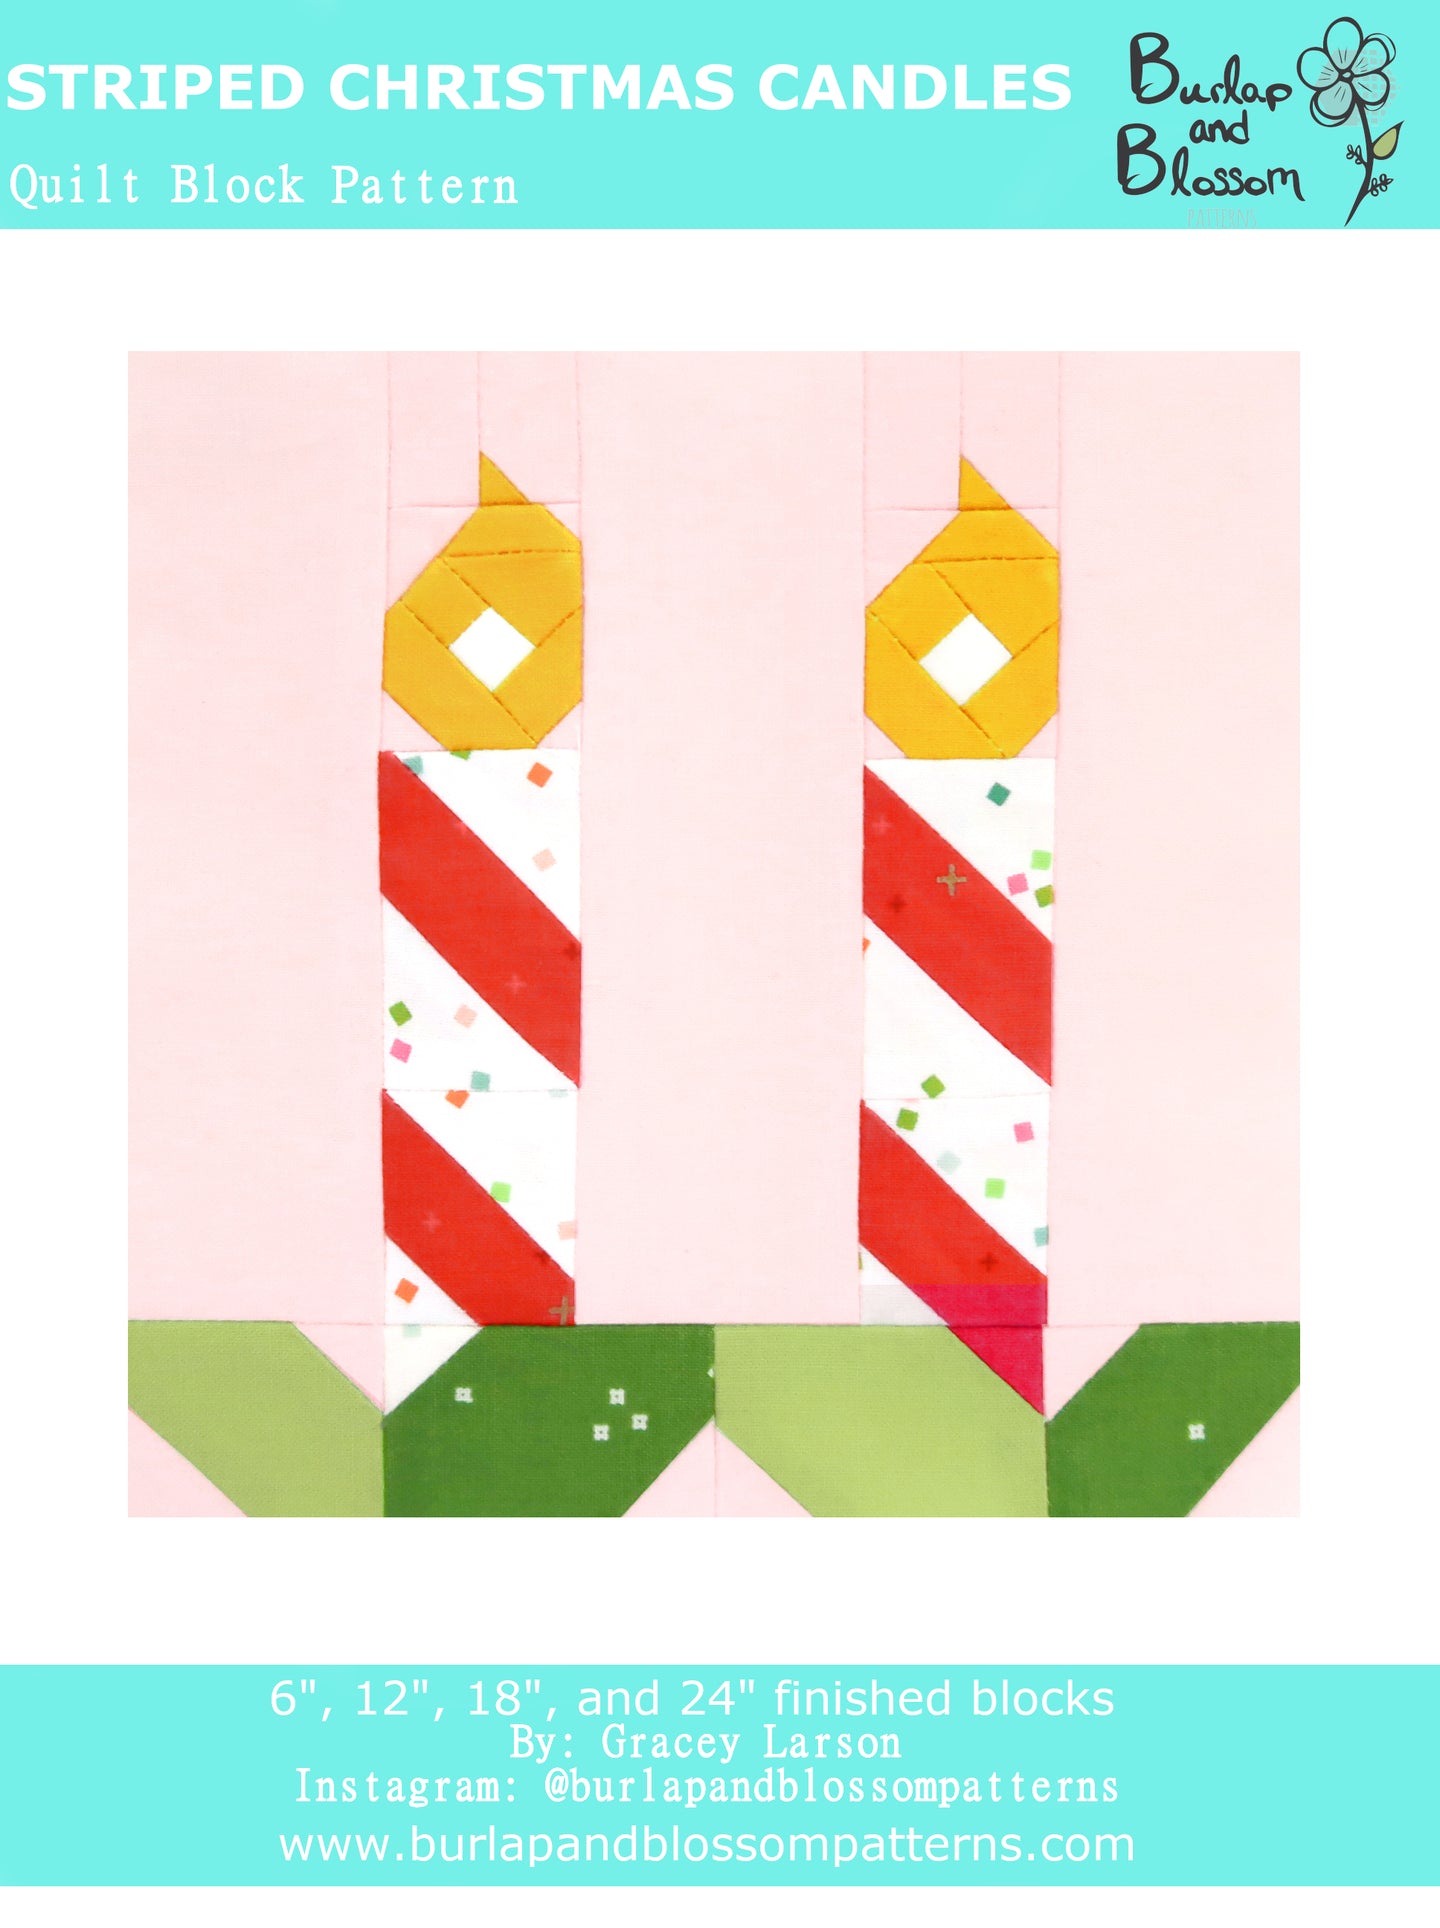 Pattern, Striped Christmas Candles Quilt Block by Burlap and Blossom (digital download)